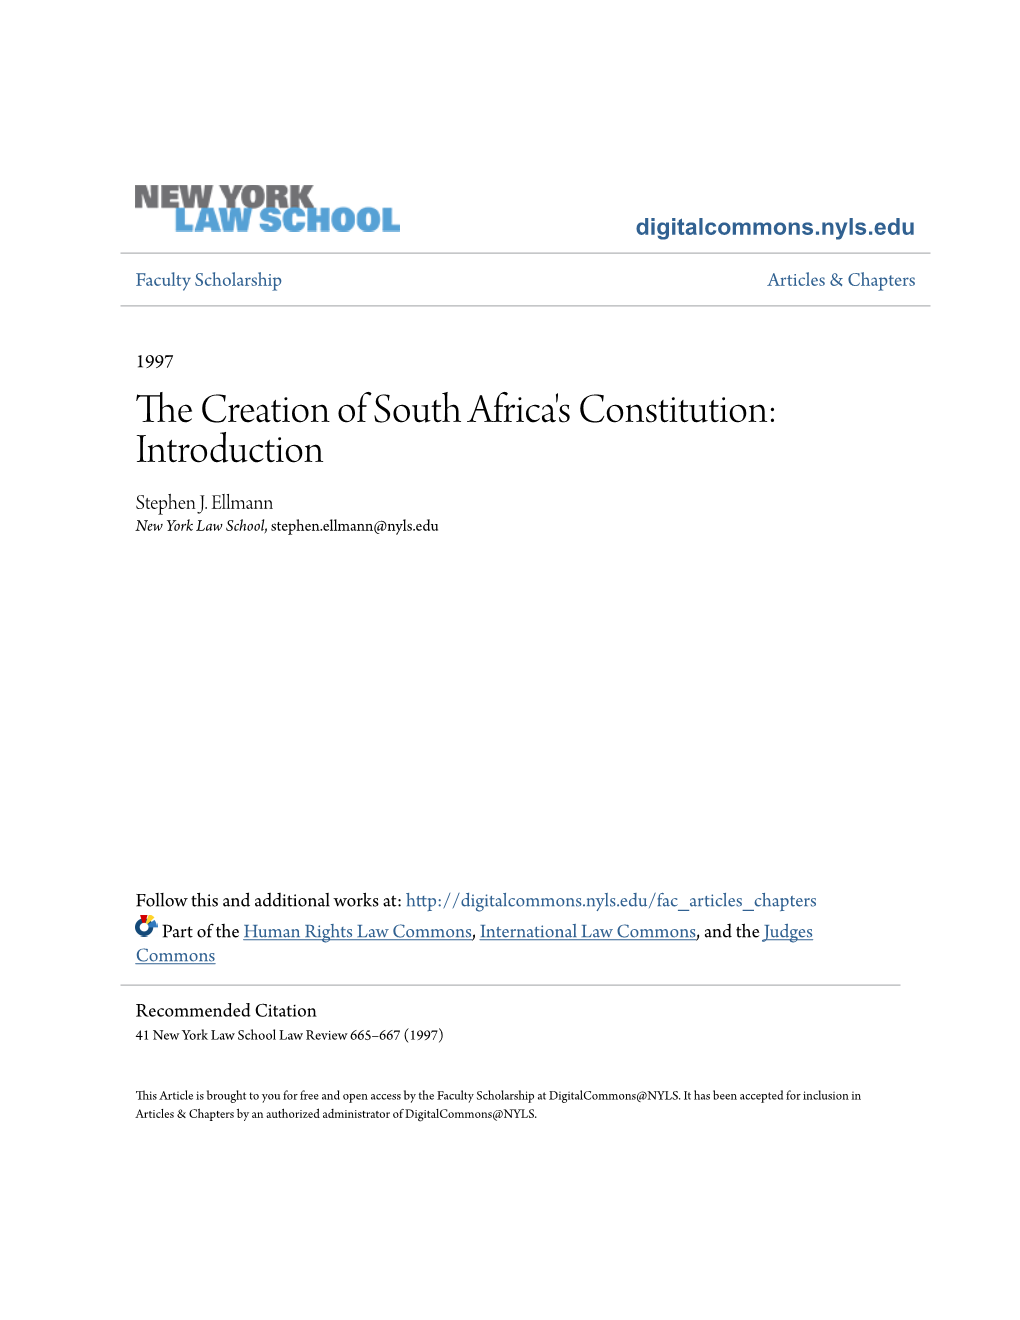 The Creation of South Africa's Constitution*